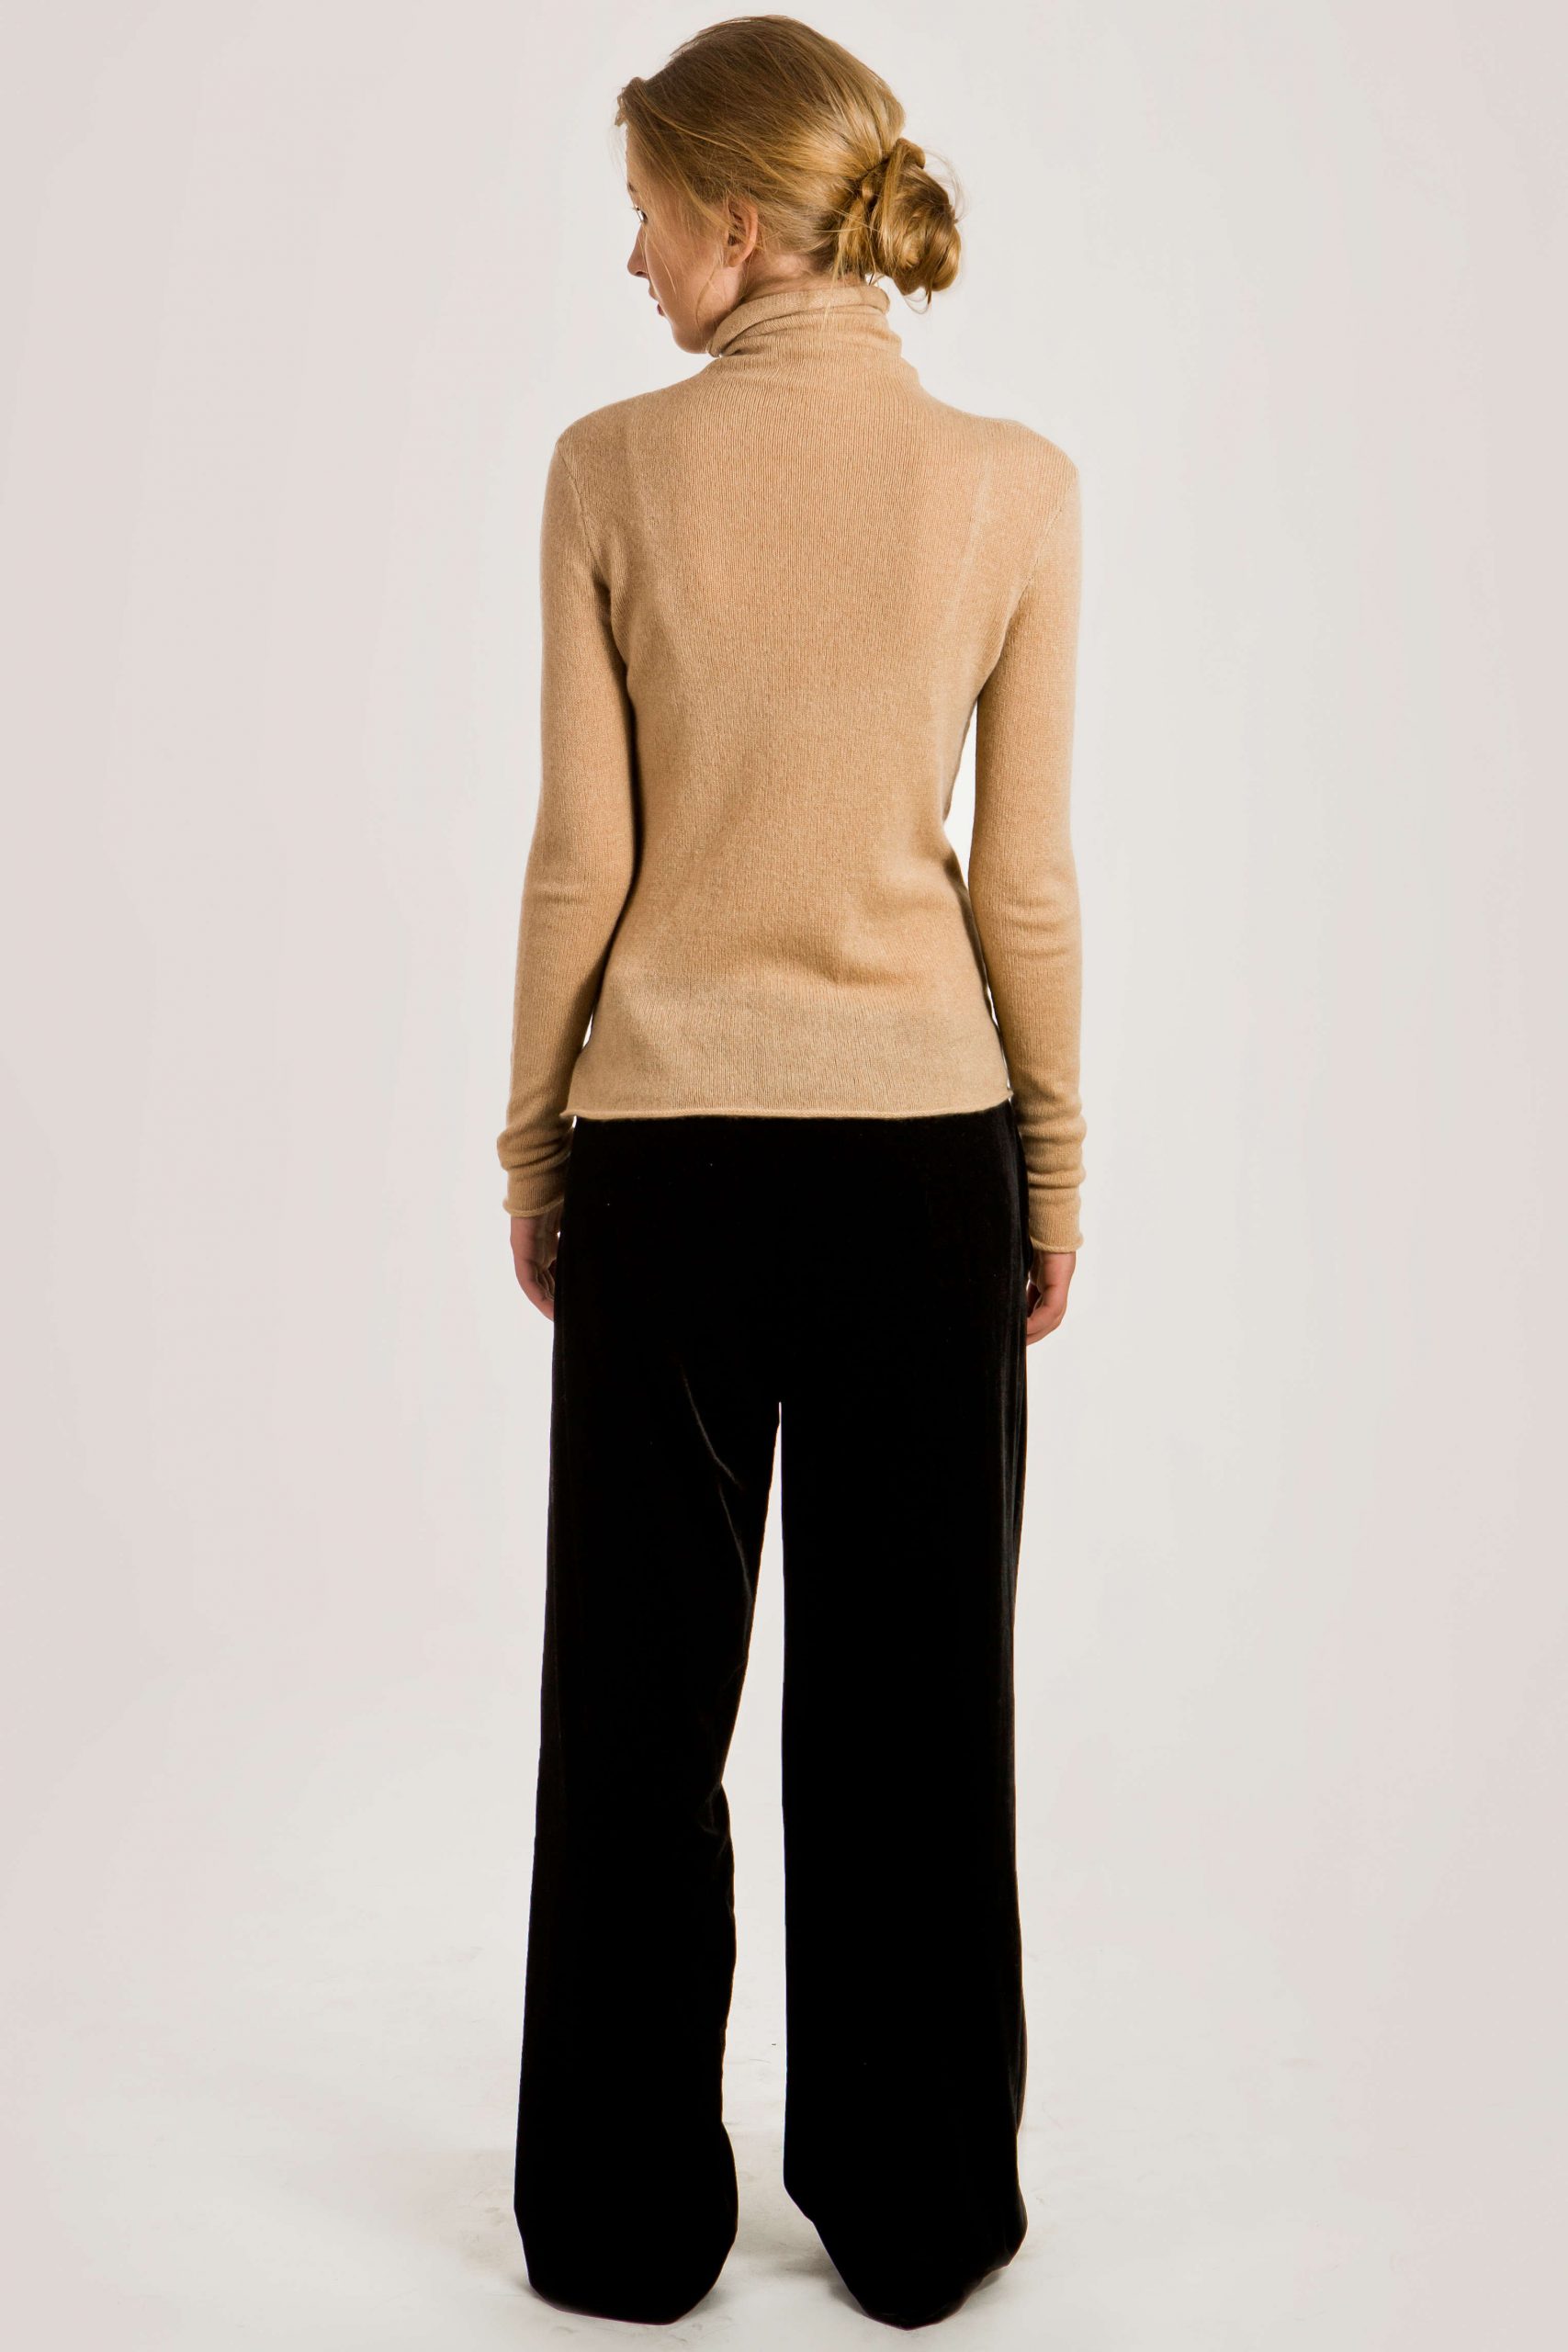 Natural Free People Aubrey Cashmere Turtleneck in Camel Womens Clothing Jumpers and knitwear Turtlenecks 